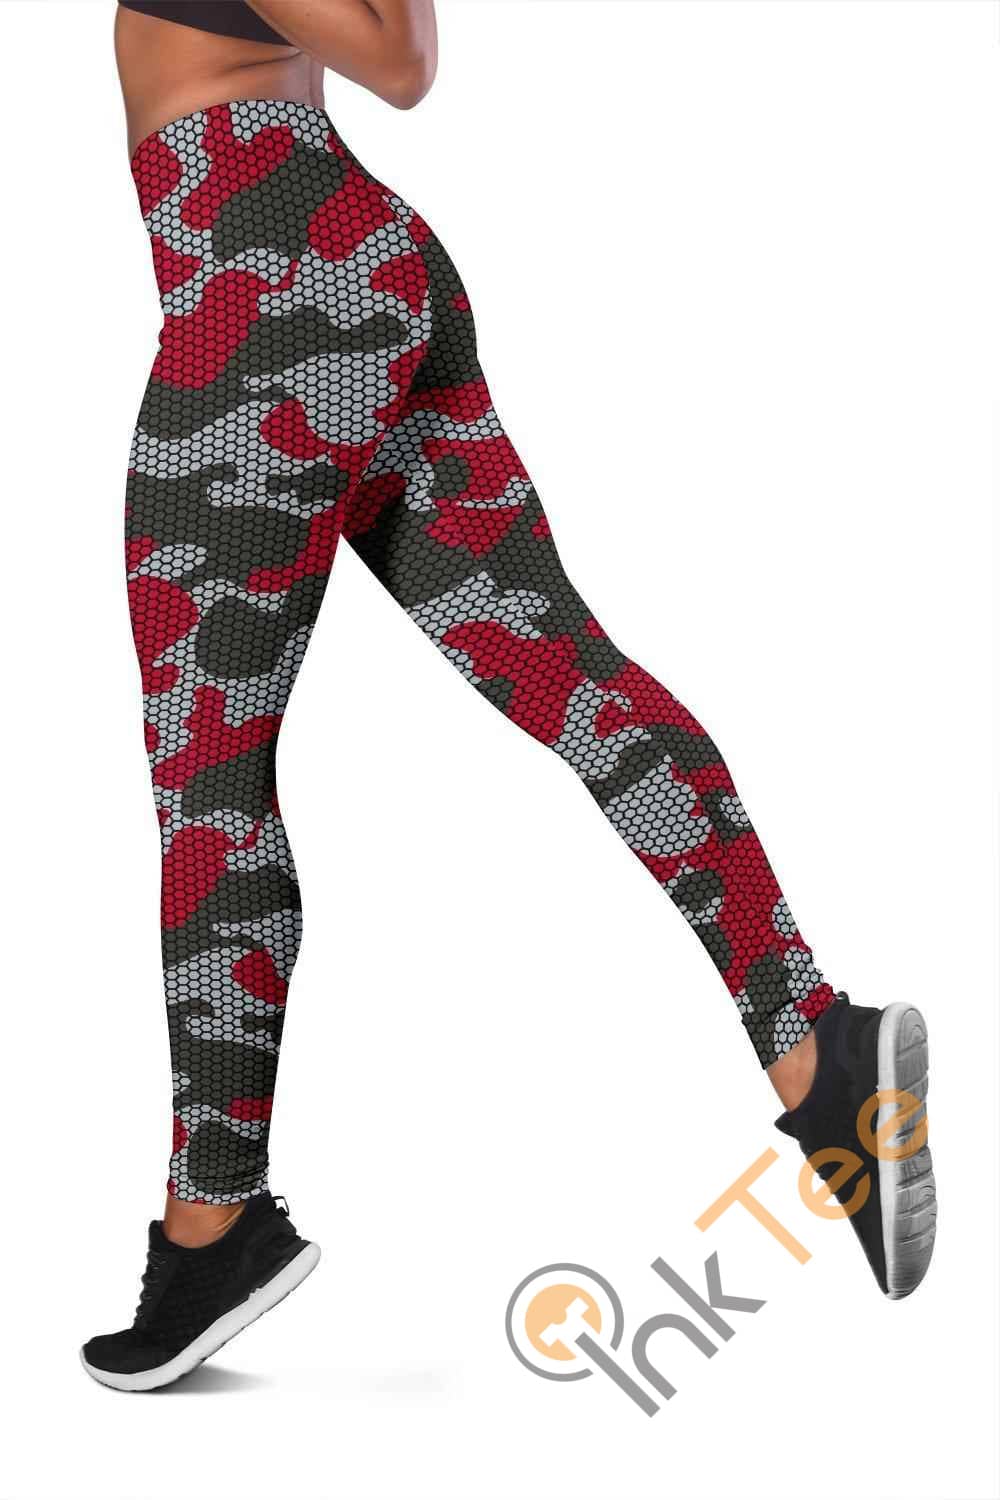 Inktee Store - Tampa Bay Buccaneers Inspired Hex Camo 3D All Over Print For Yoga Fitness Fashion Women'S Leggings Image